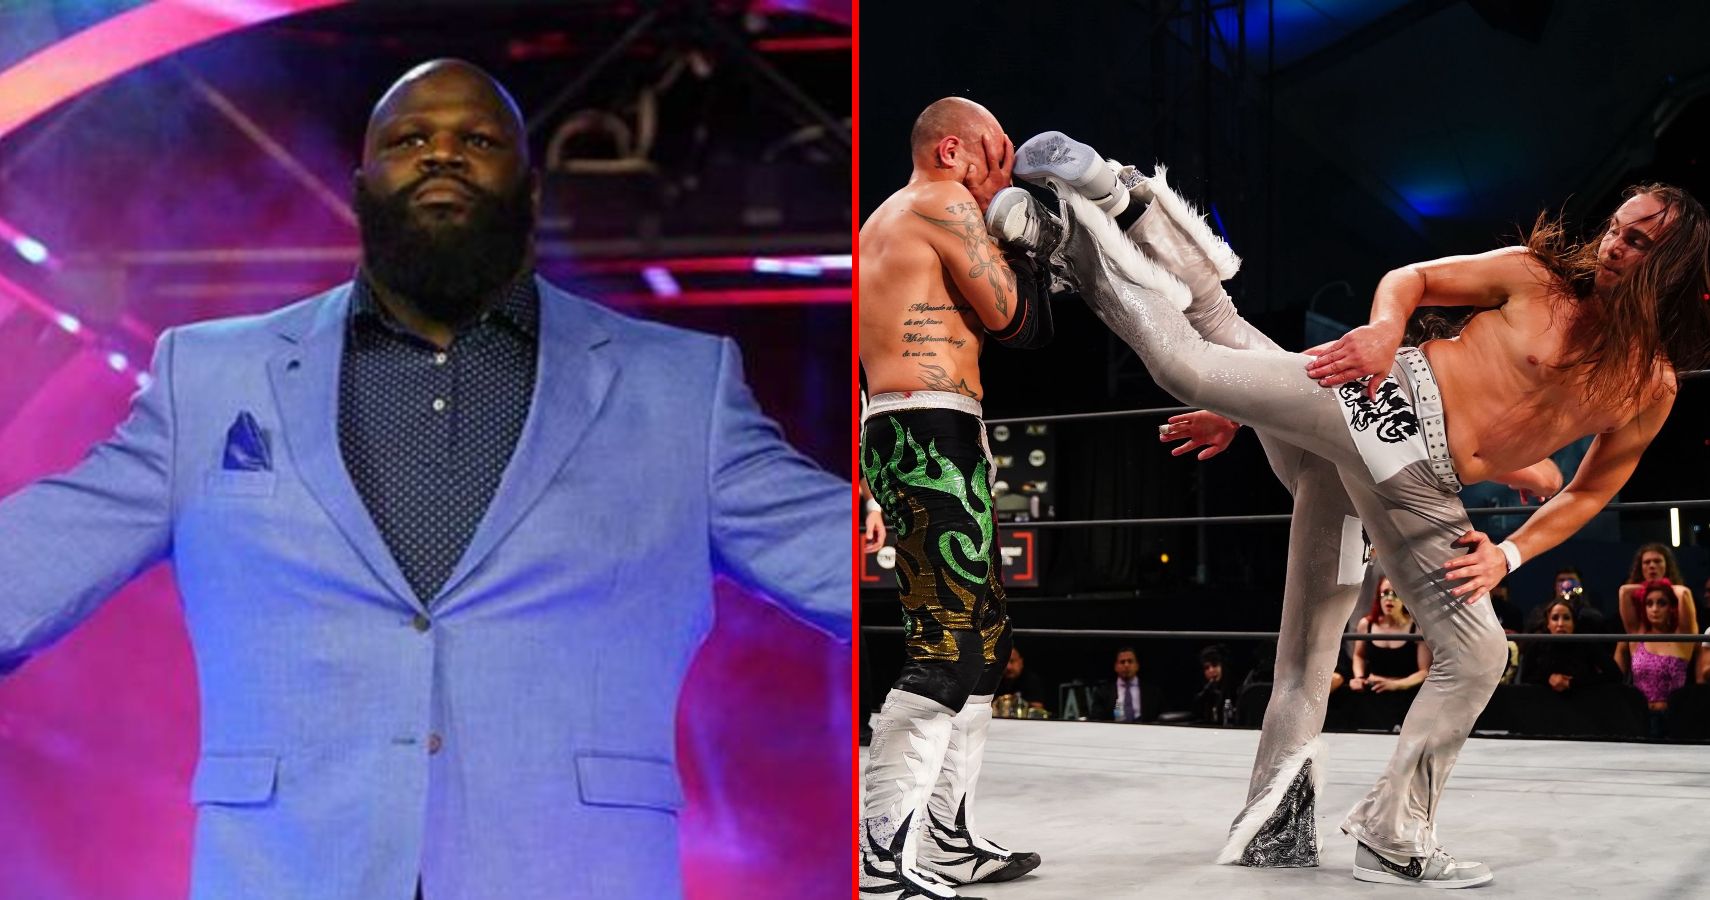 LEFT: WWE Hall of Famer Mark Henry debuts for AEW at Double Or Nothing // RIGHT: The Young Bucks perform tandem super kicks on AEW Dynamite